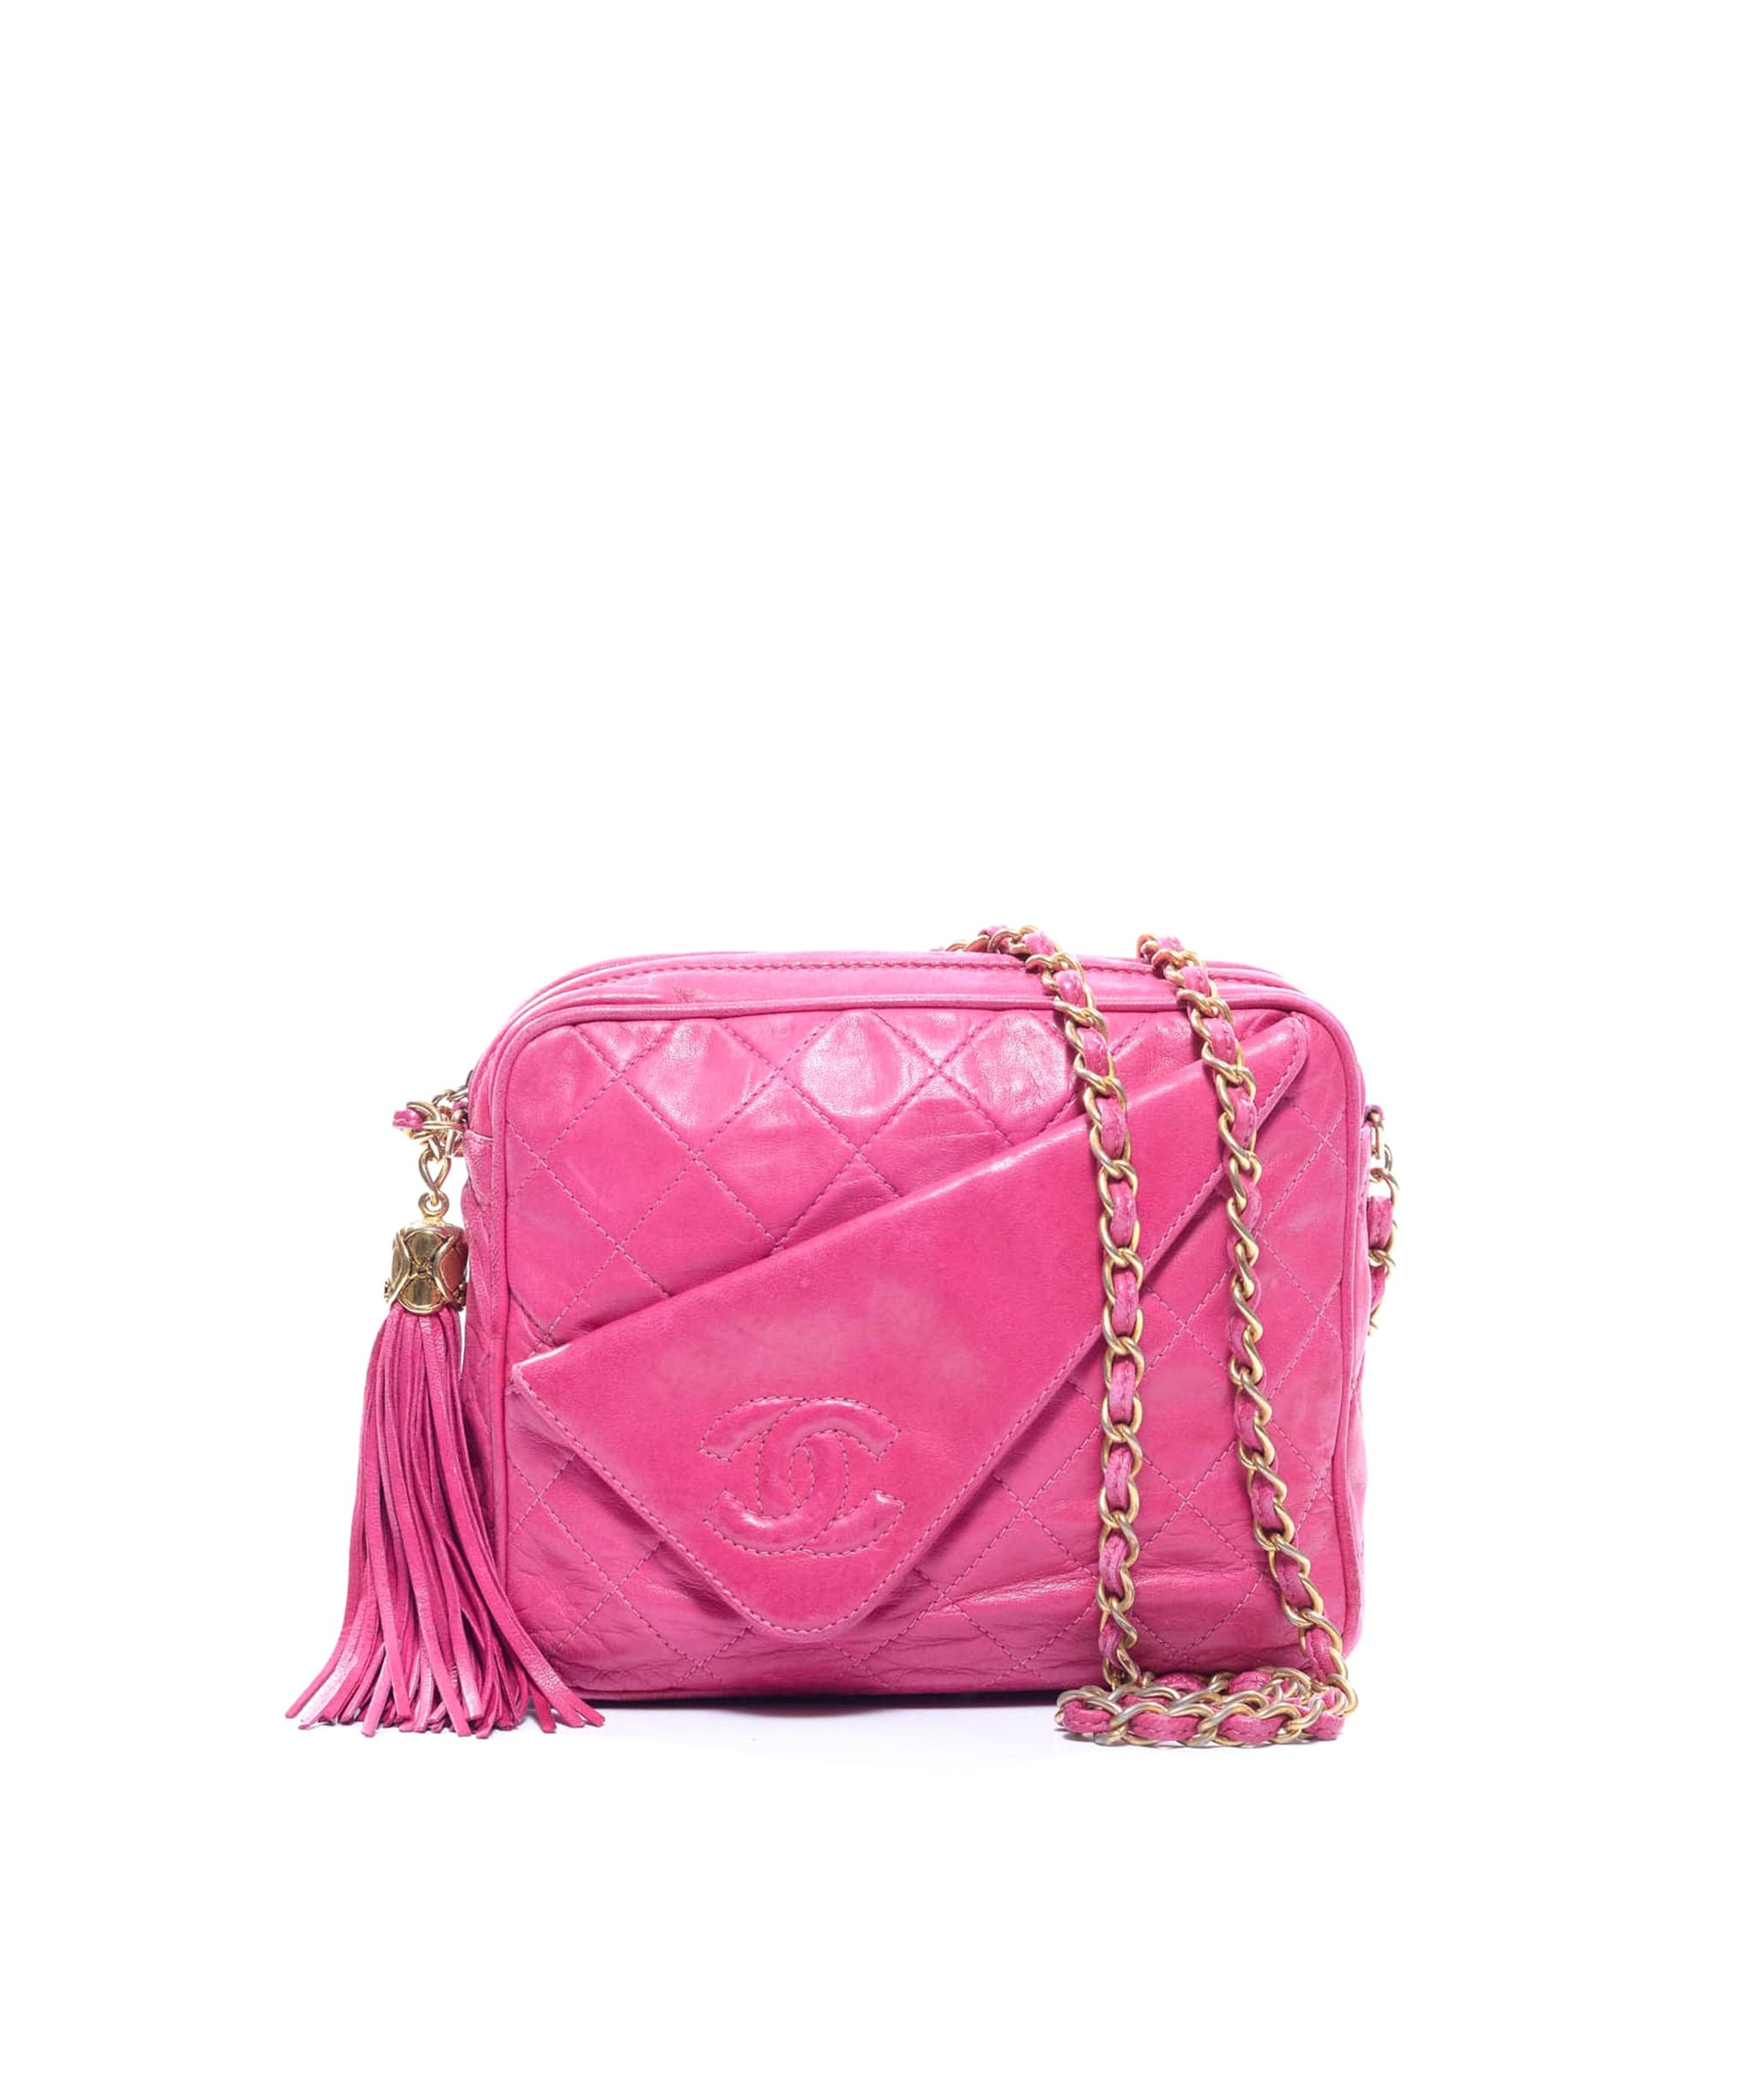 Chanel Chanel Vintage Pink Camera Leather Bag - AWC1744